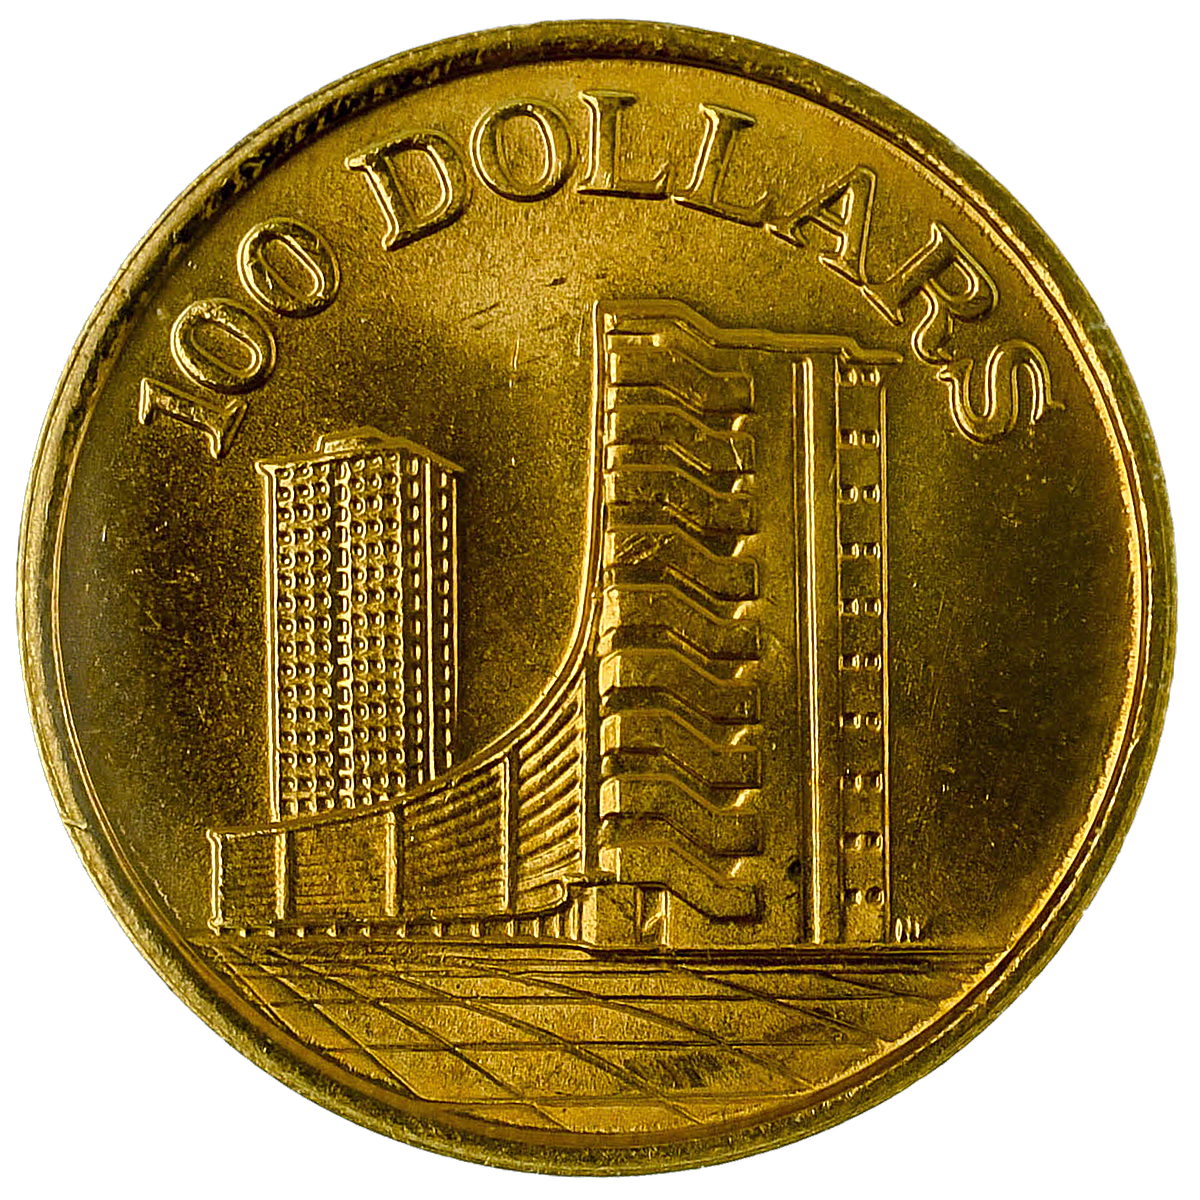 Singapore Mint 10th Anniversary of the Republic of Singapore 1965-1975 - HDB - Circulated in good condition - 5.44 g goldSingapore Mint 10th Anniversary of the Republic of Singapore 1965-1975 - HDB - Circulated in good condition - 5.44 g gold